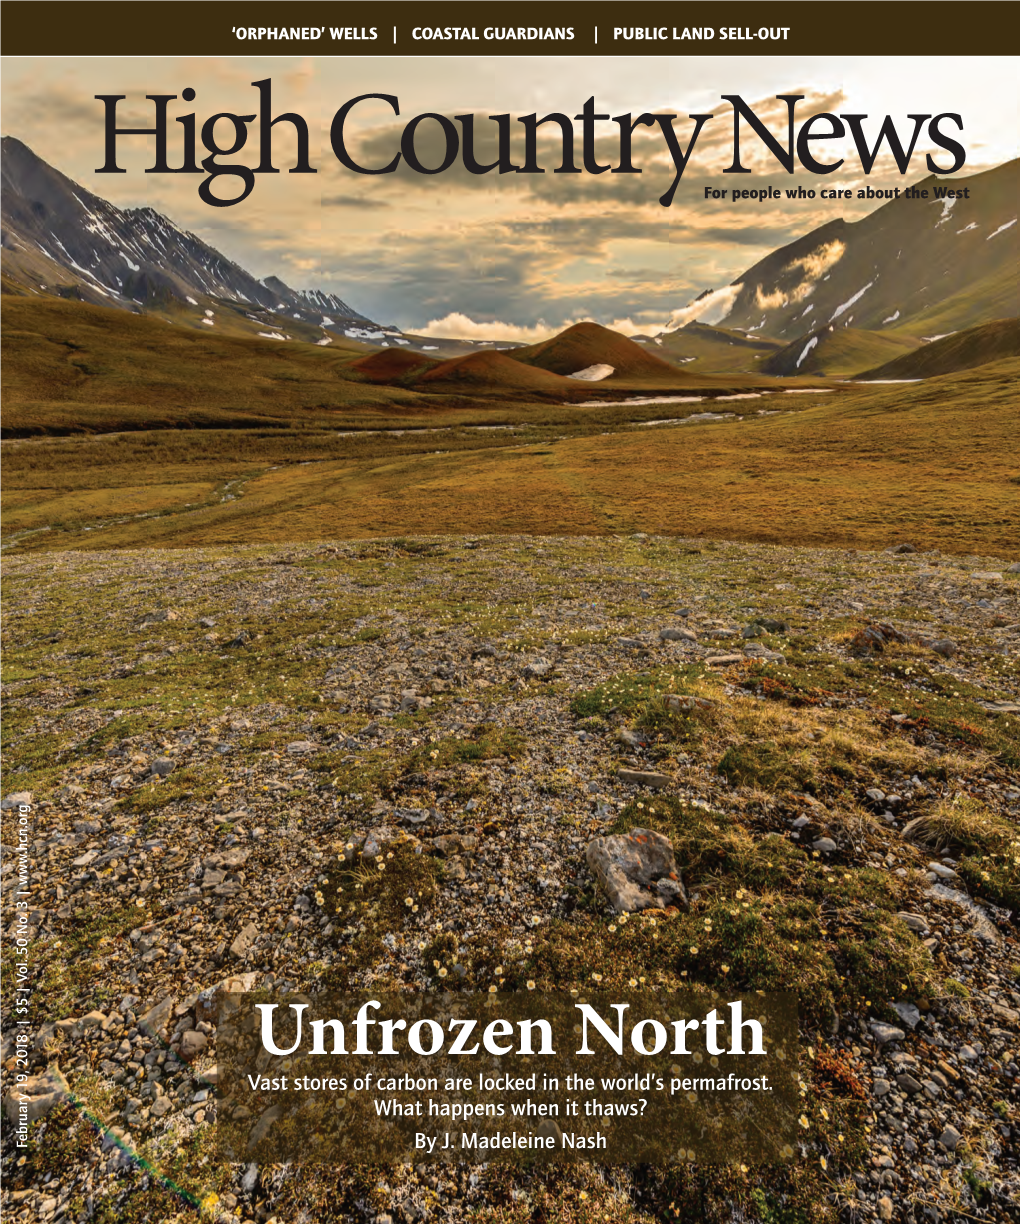 Unfrozen North Vast Stores of Carbon Are Locked in the World’S Permafrost